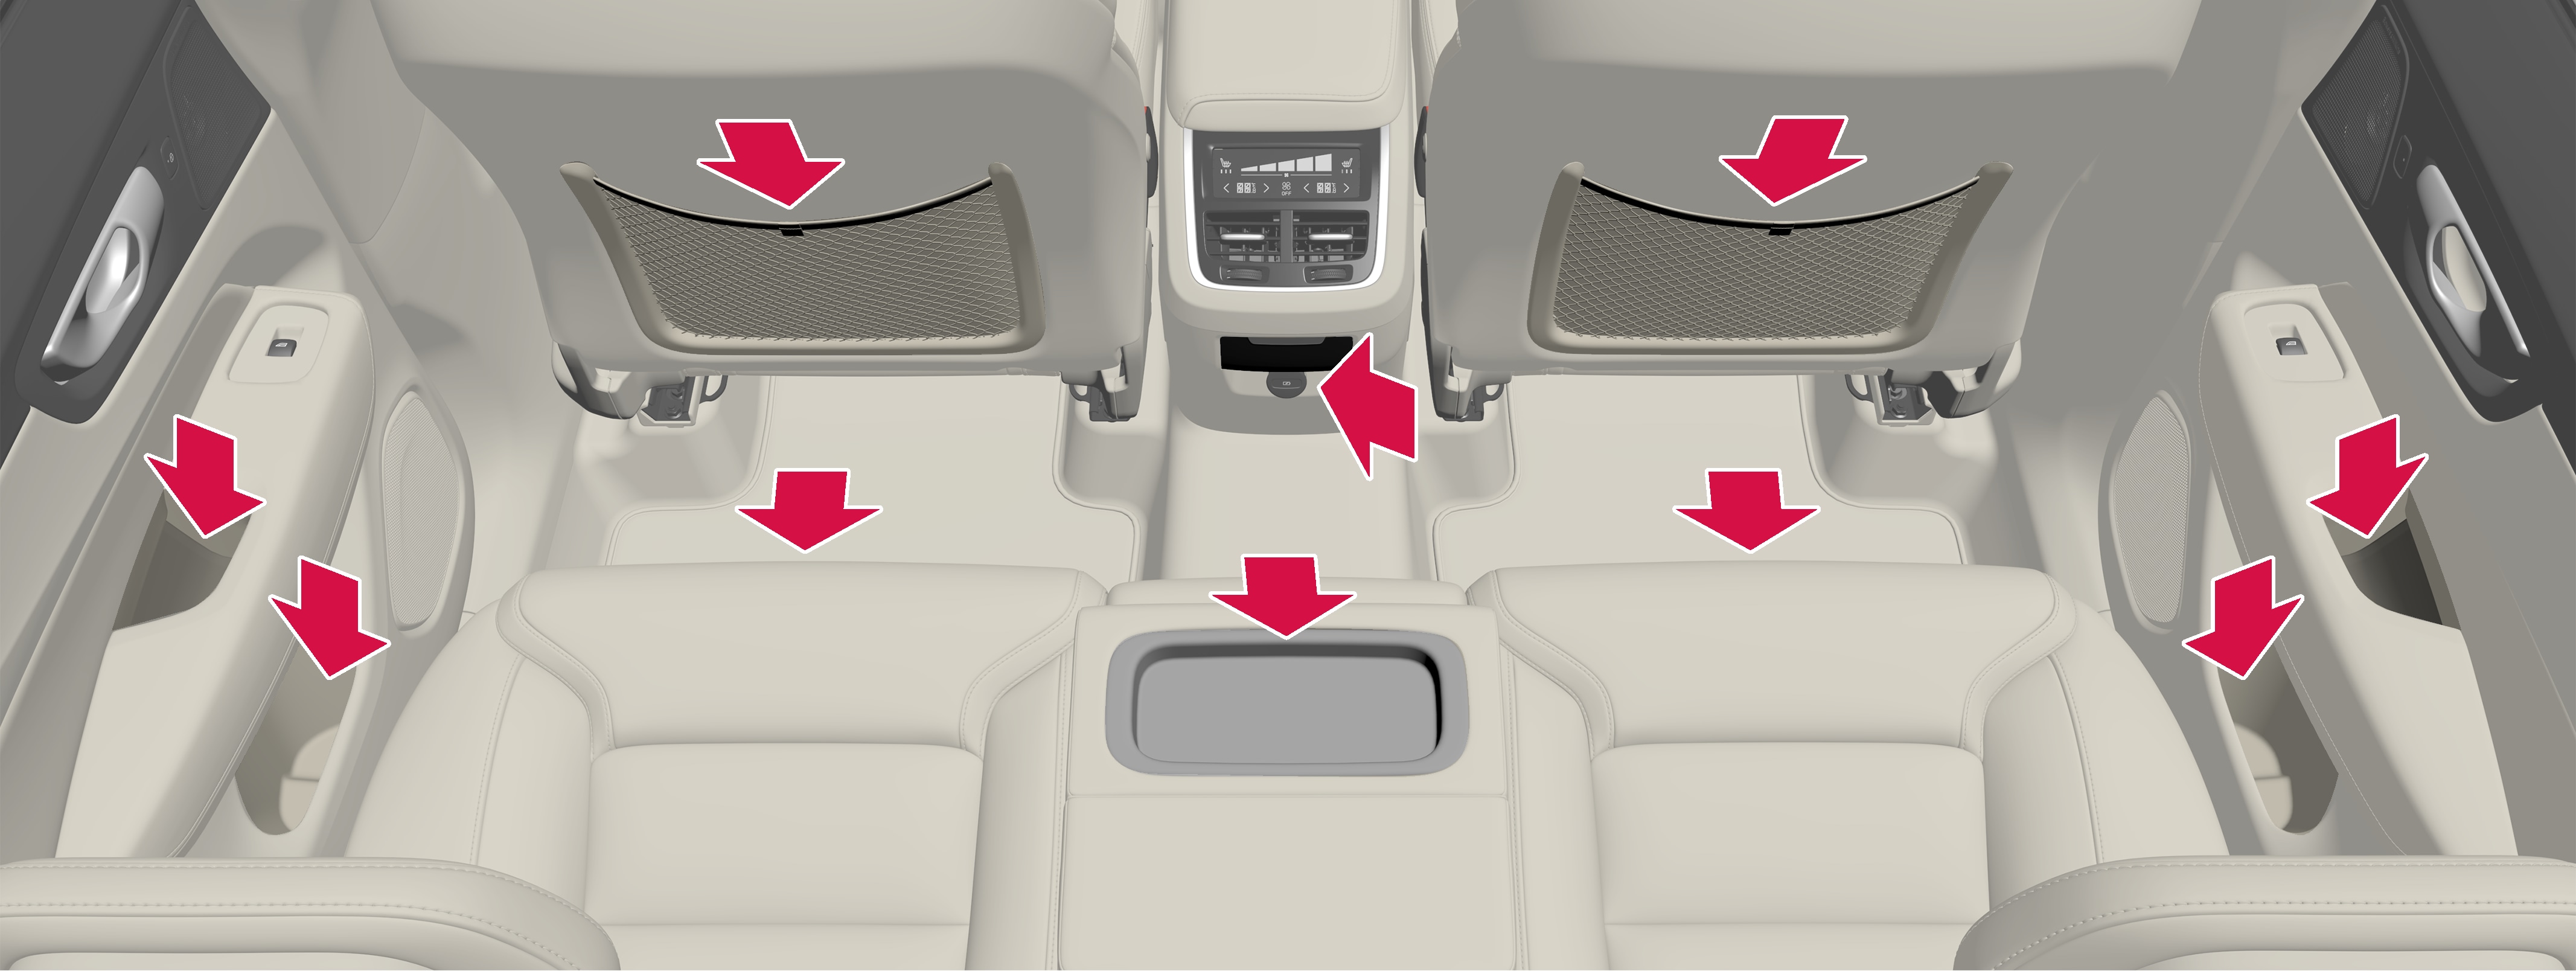 P5-2017-S/V90-Interior-Overview rear seat row